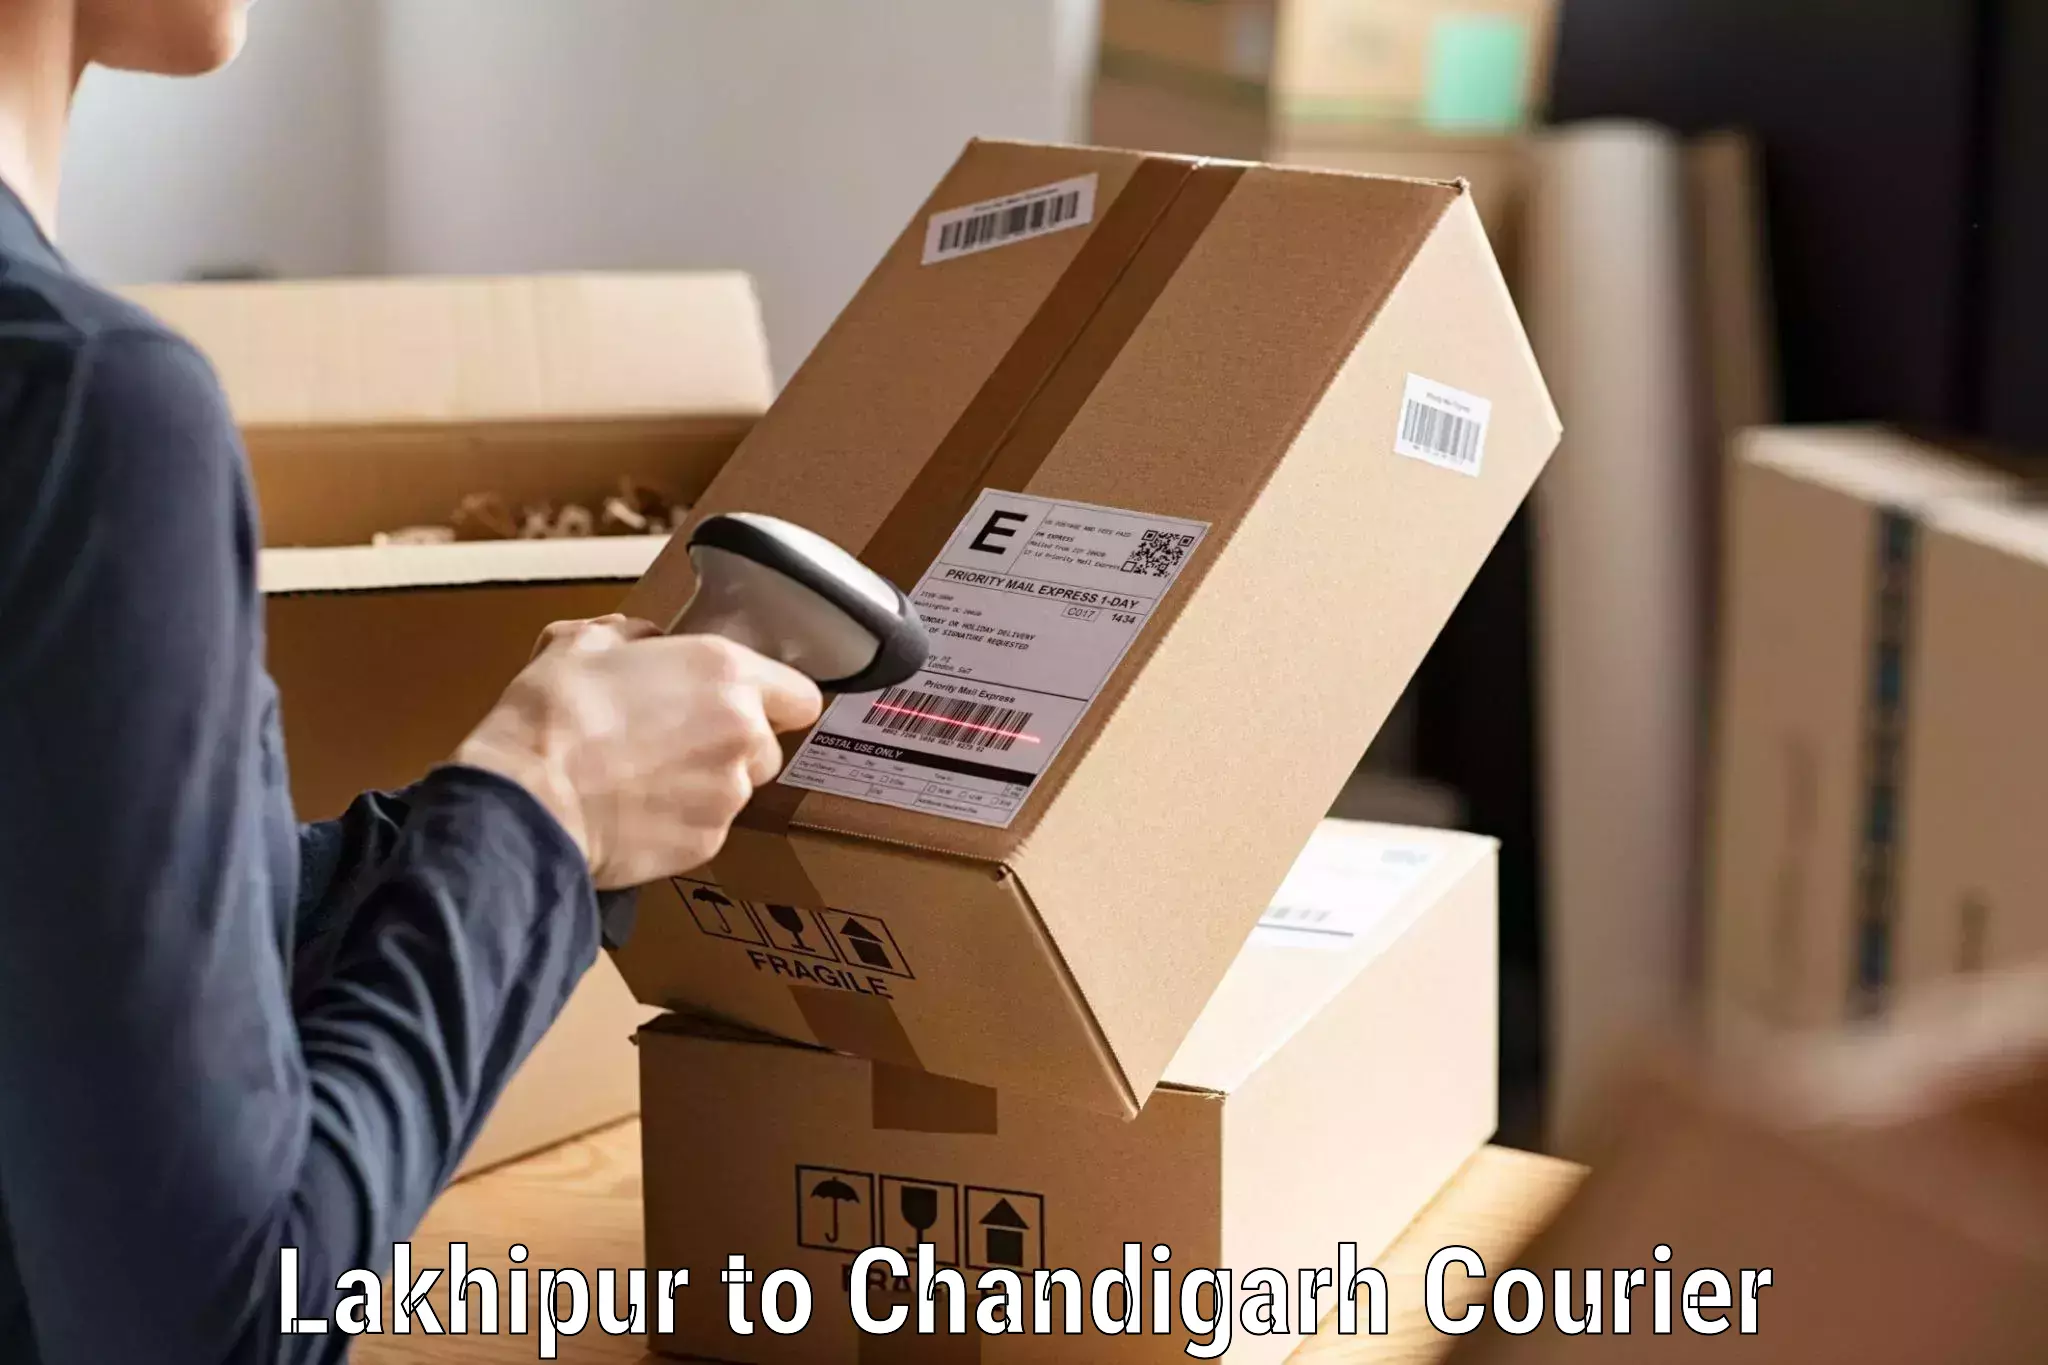 Courier service efficiency Lakhipur to Chandigarh